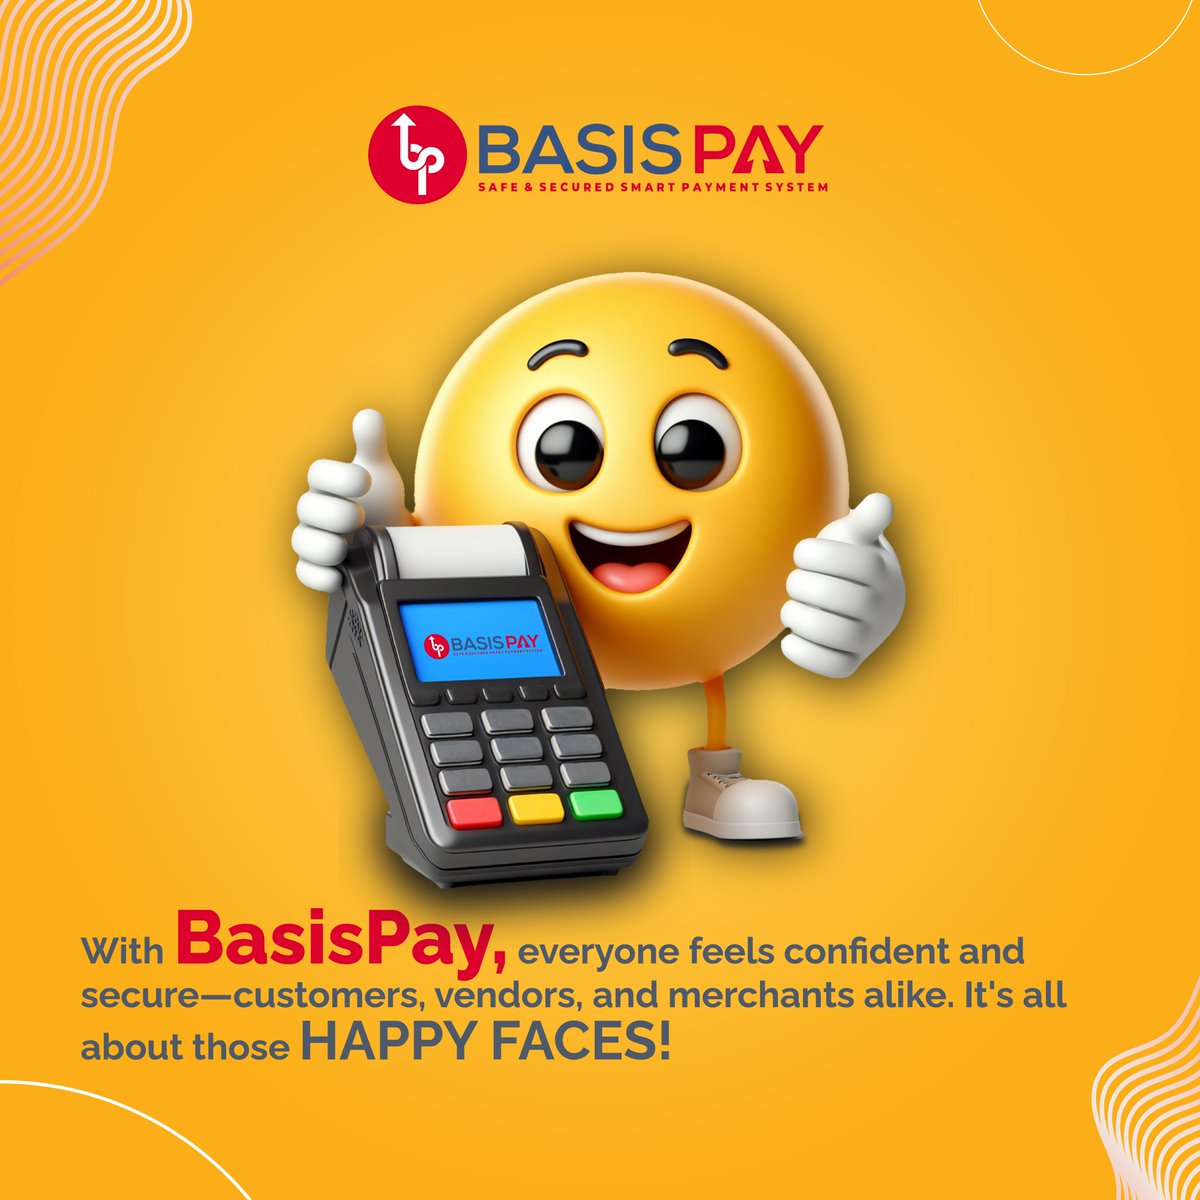 BasisPay Payment System 

#basispay #upi #pointofsale #contactlesspayments #buy #bank #finance #news #online #mobile #shopping #pos #qrpay #qr #digitalpayment #payments #paymentgateway #india #digitalmoney #debitcard #creditcard #buy #digital #world #ai